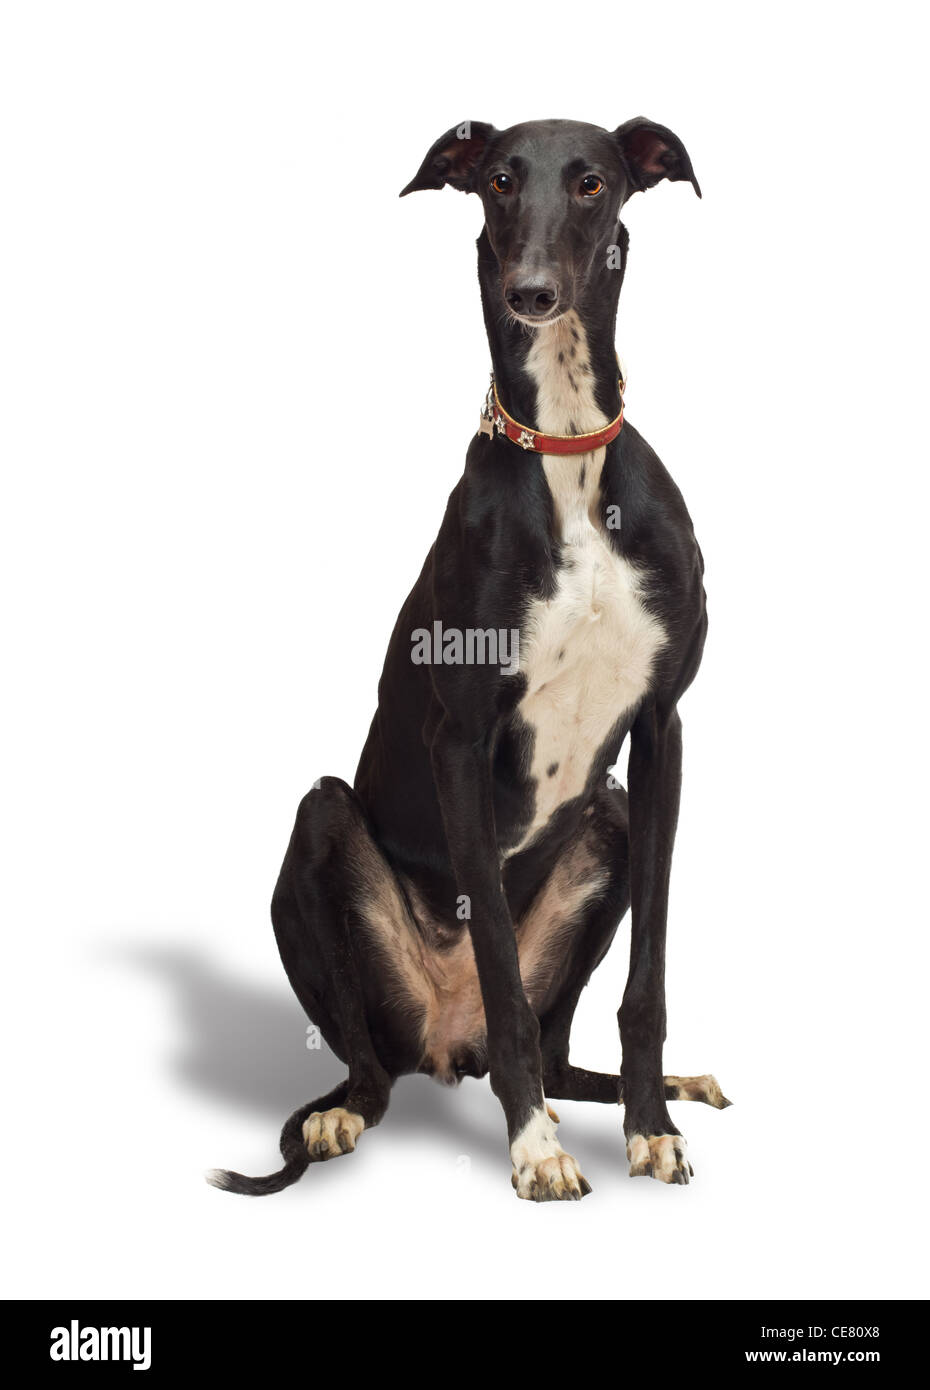 Greyhound dog, 18 years old, in front of white background Banque D'Images